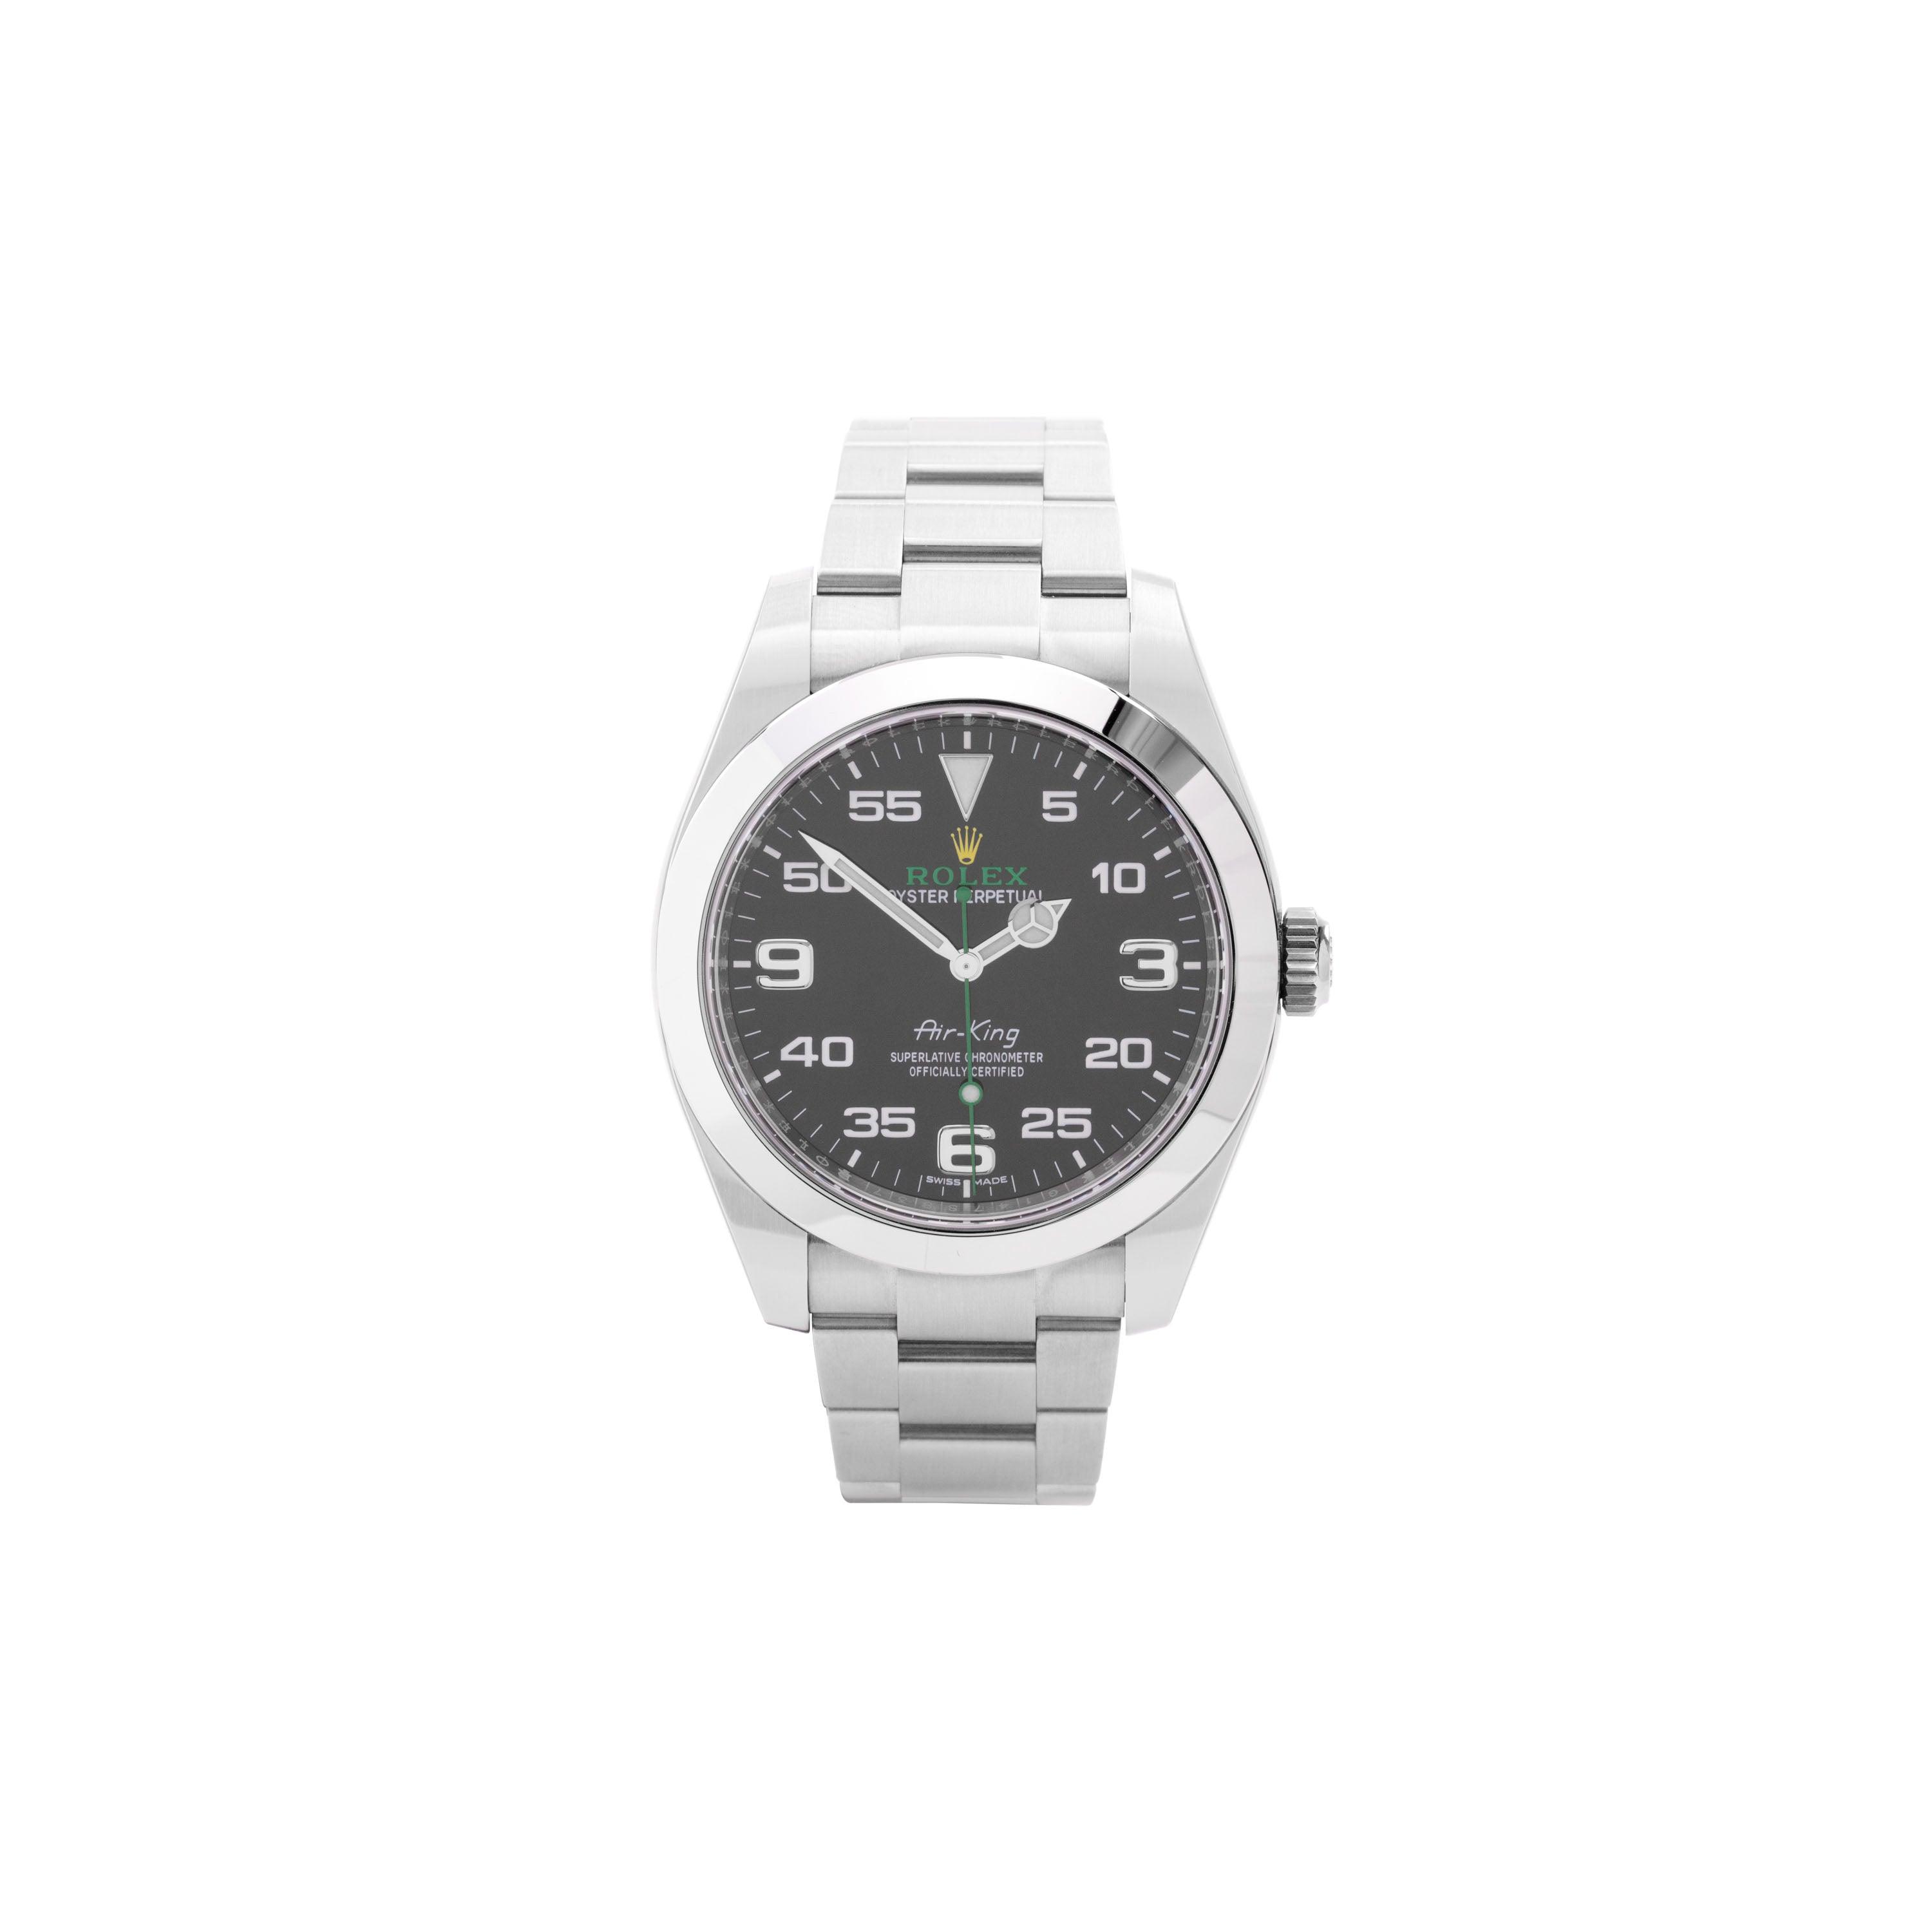 opladning Sanctuary Underholdning ROLEX 40MM STAINLESS STEEL AIR KING WATCH